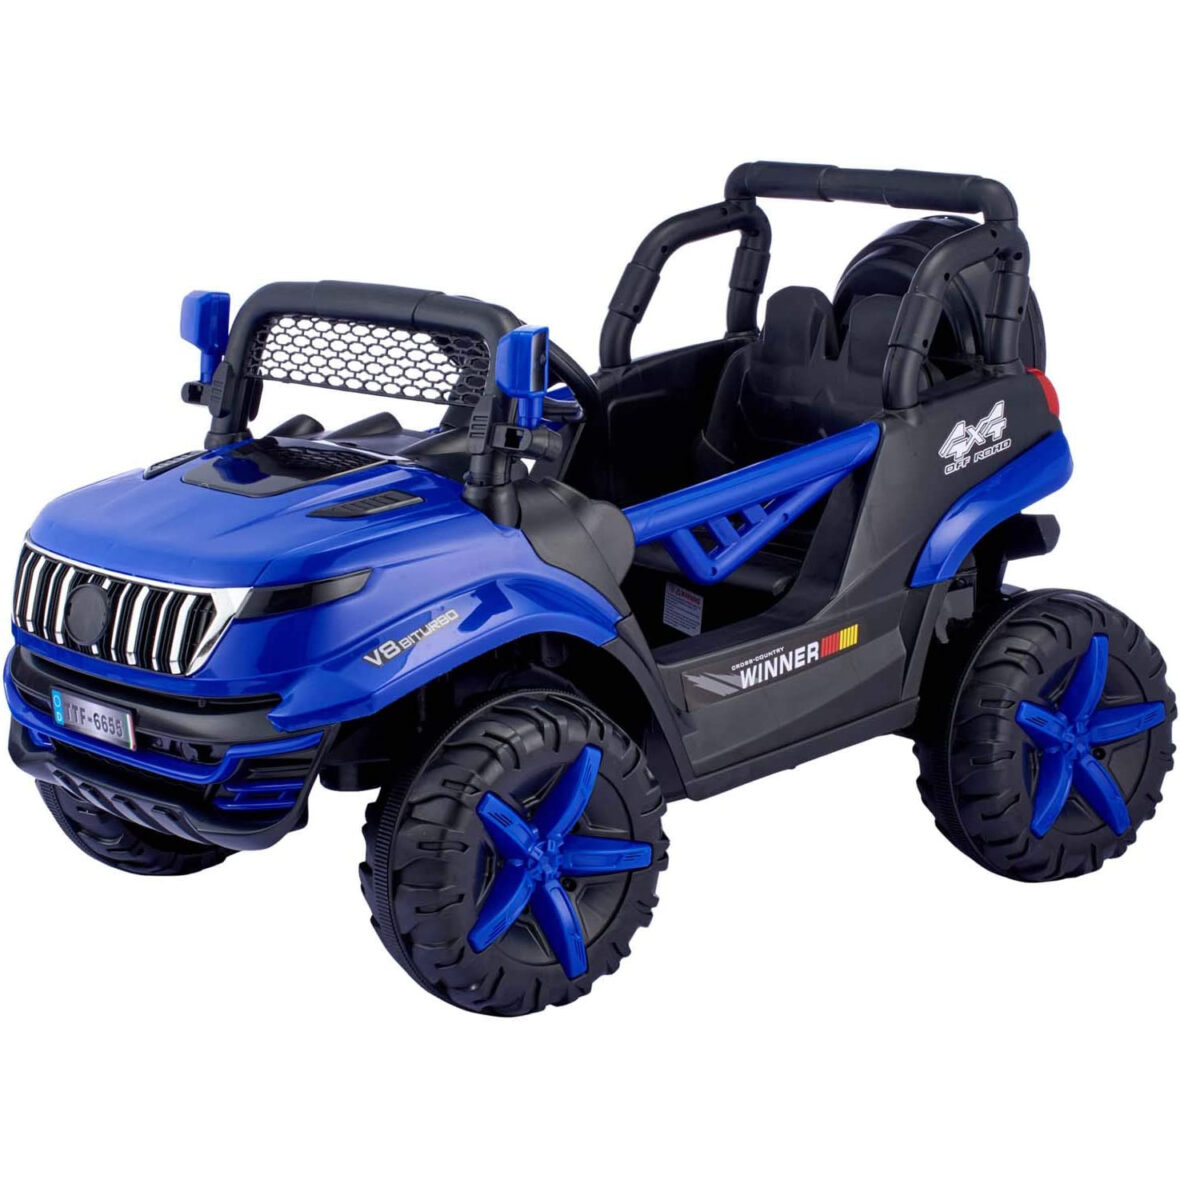 U Smile Ride-on Car with Rechargeable Battery for Kids – Blue – TTF6655